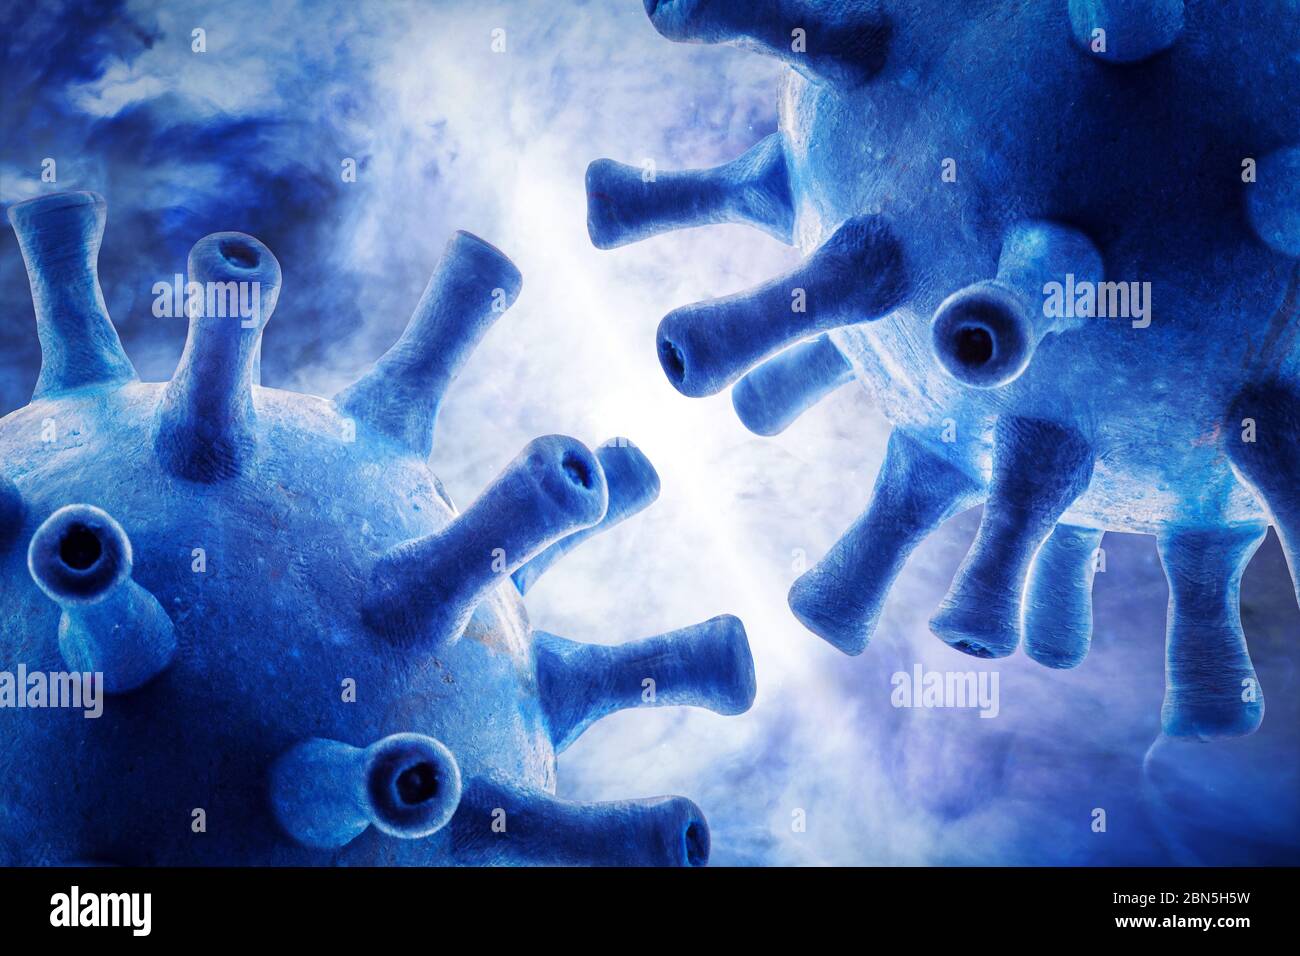 Coronavirus or flu germs on blue background, 3d illustration, macro view of SARS-CoV-2 corona virus inside cell. Concept of science technology, COVID- Stock Photo